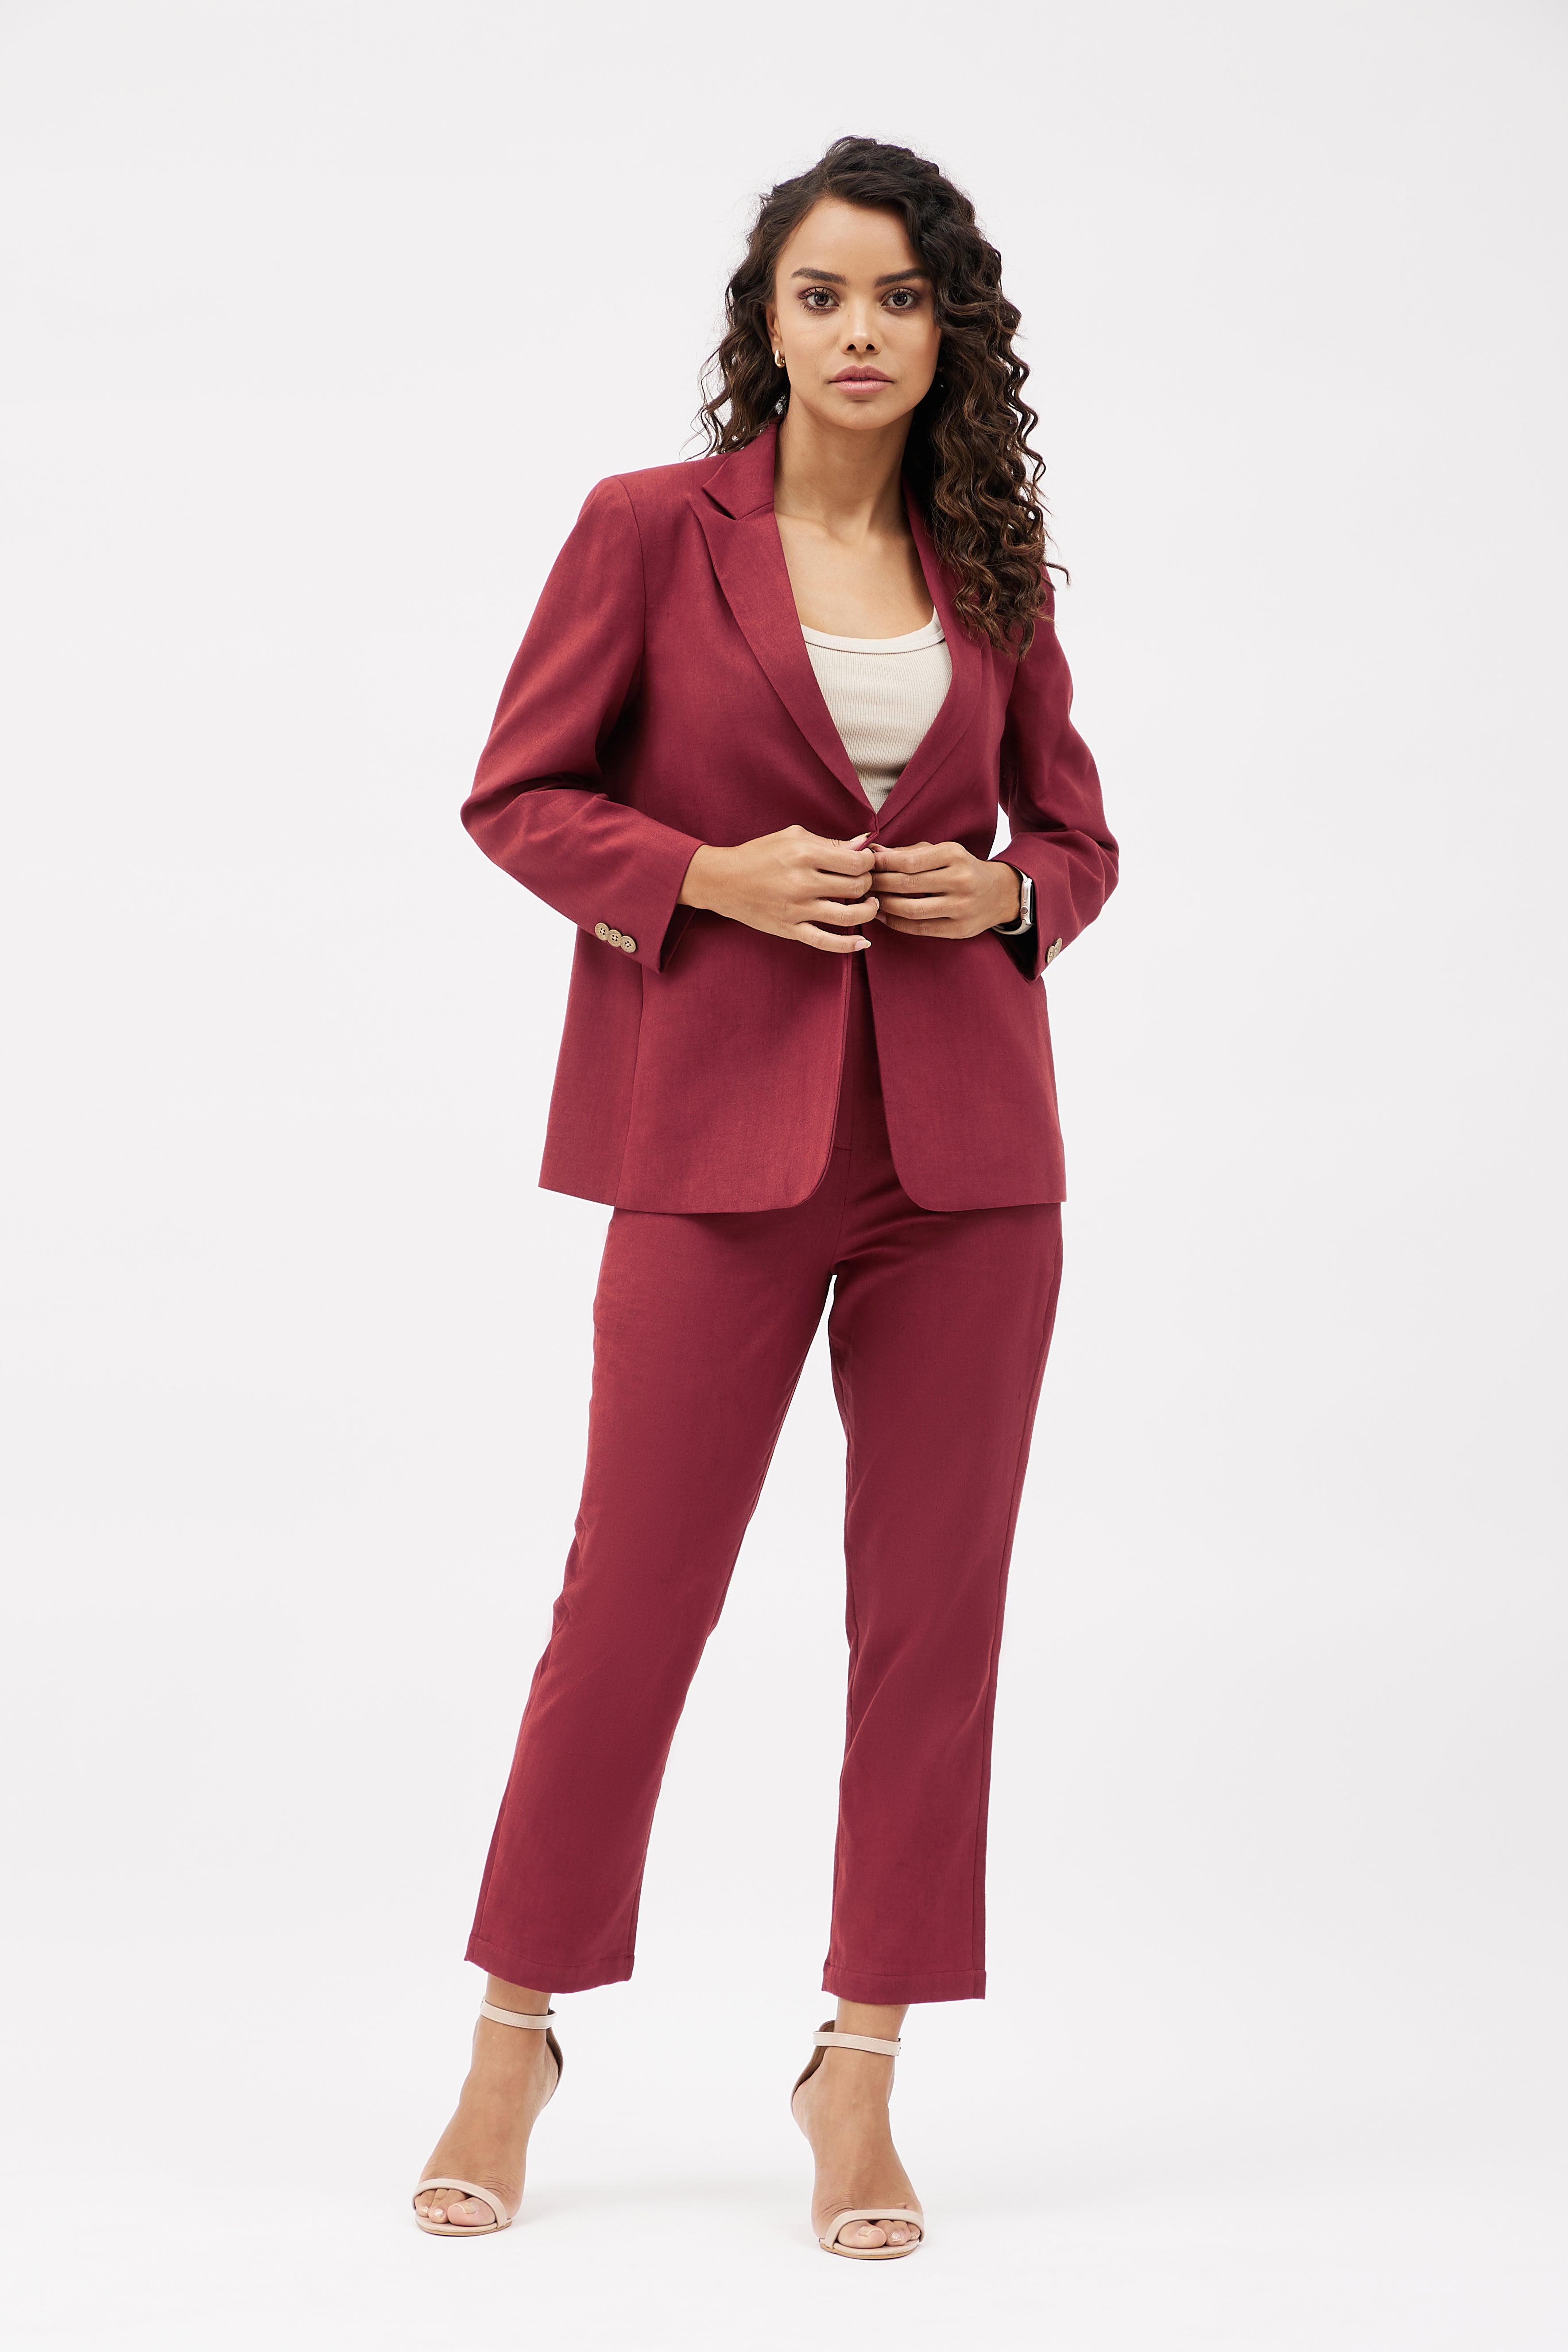 Glamher Women Blazer Shirt and Trouser Set  Buy Glamher Women Blazer  Shirt and Trouser Set Online at Best Prices in India  Flipkartcom